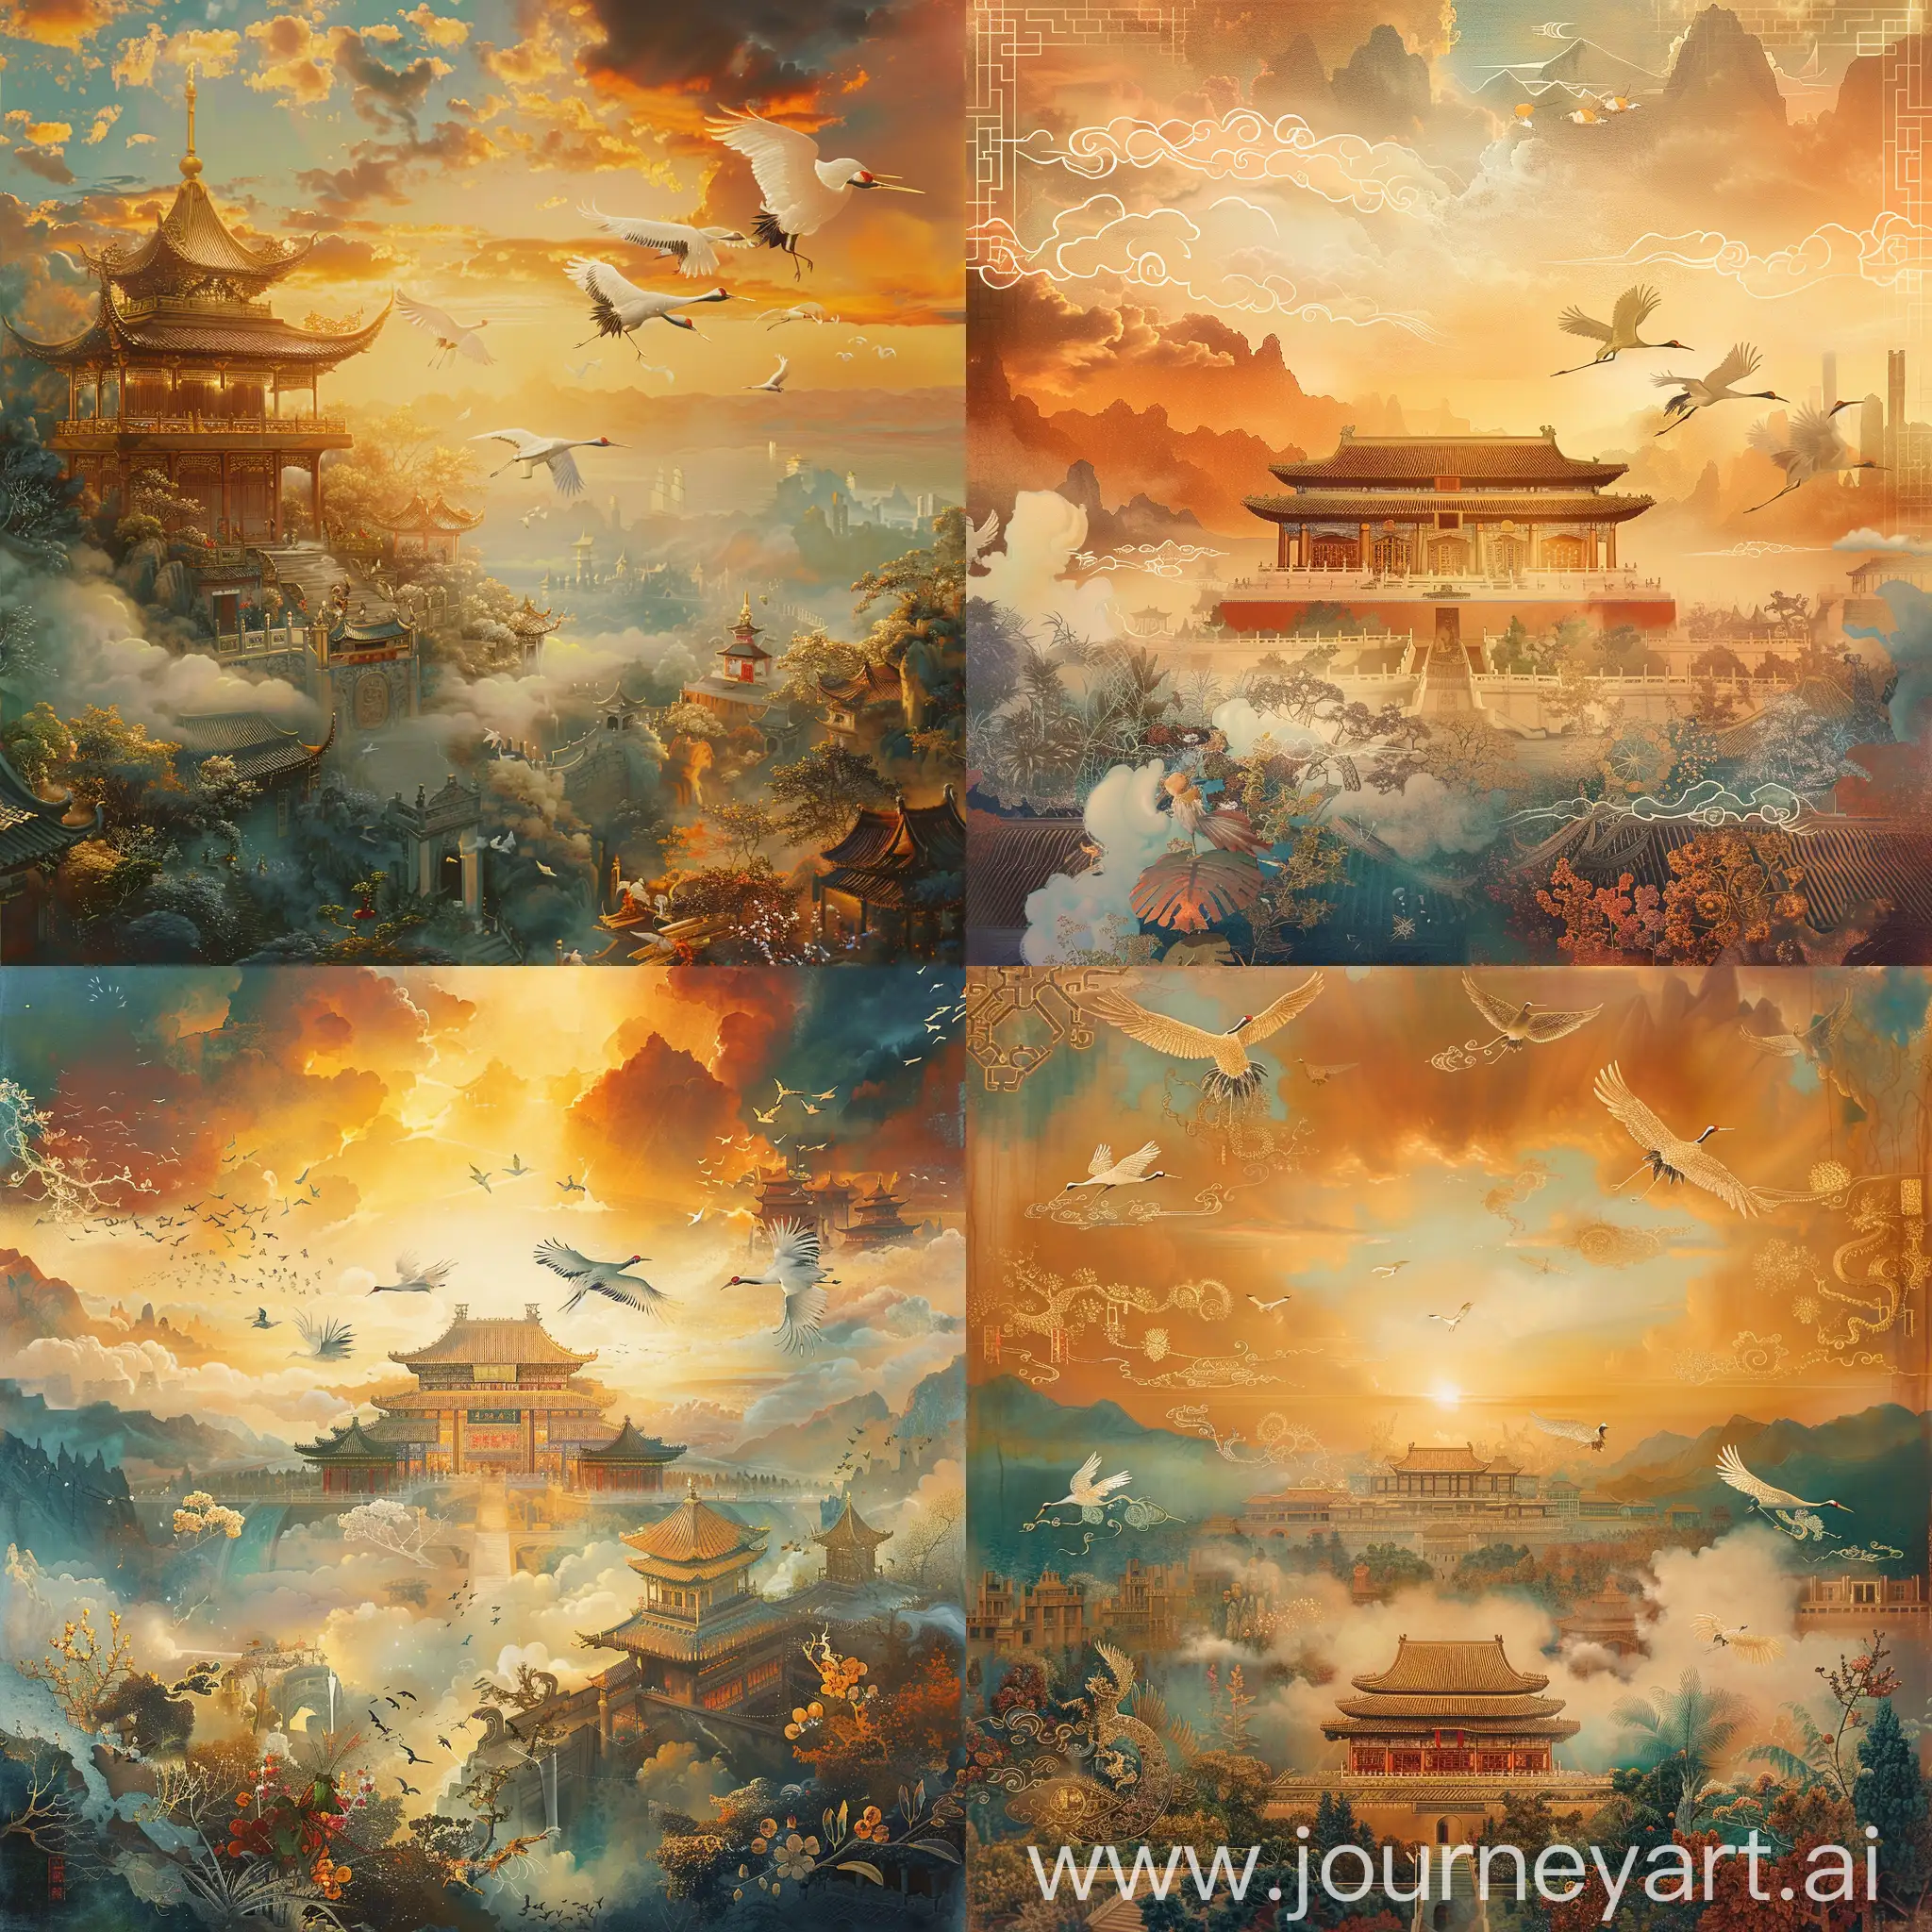 arly morning in the celestial realm of Chinese mythology, overlooking a majestic and mysterious heavenly palace bathed in the warm glow of dawn's first light. The scene is rich in warm golds, oranges, and reds, reflecting the sunrise. The palace is adorned with classical Chinese architecture, featuring flying eaves and intricate carvings, highlighted in gold and white, with touches of blue-green glaze. Surrounding the palace, ethereal clouds and mist weave around exotic plants and silhouettes of mythical creatures like phoenixes and qilins, adding a layer of fantasy. The composition combines a bird's-eye view with balanced arrangements of the palace, celestial flora, and distant mountains, creating a dynamic yet harmonious visual experience. Special attention is paid to the interplay of light and shadow, enhancing the mystical and serene atmosphere of a divine morning in the heavens. Don't write words on picture. turn flying animals to Cranes. Chinese traditional painting Cranes. Cranes flying more graceful. picture more clean. Remove far buildings. Li Keran style --v 6.0